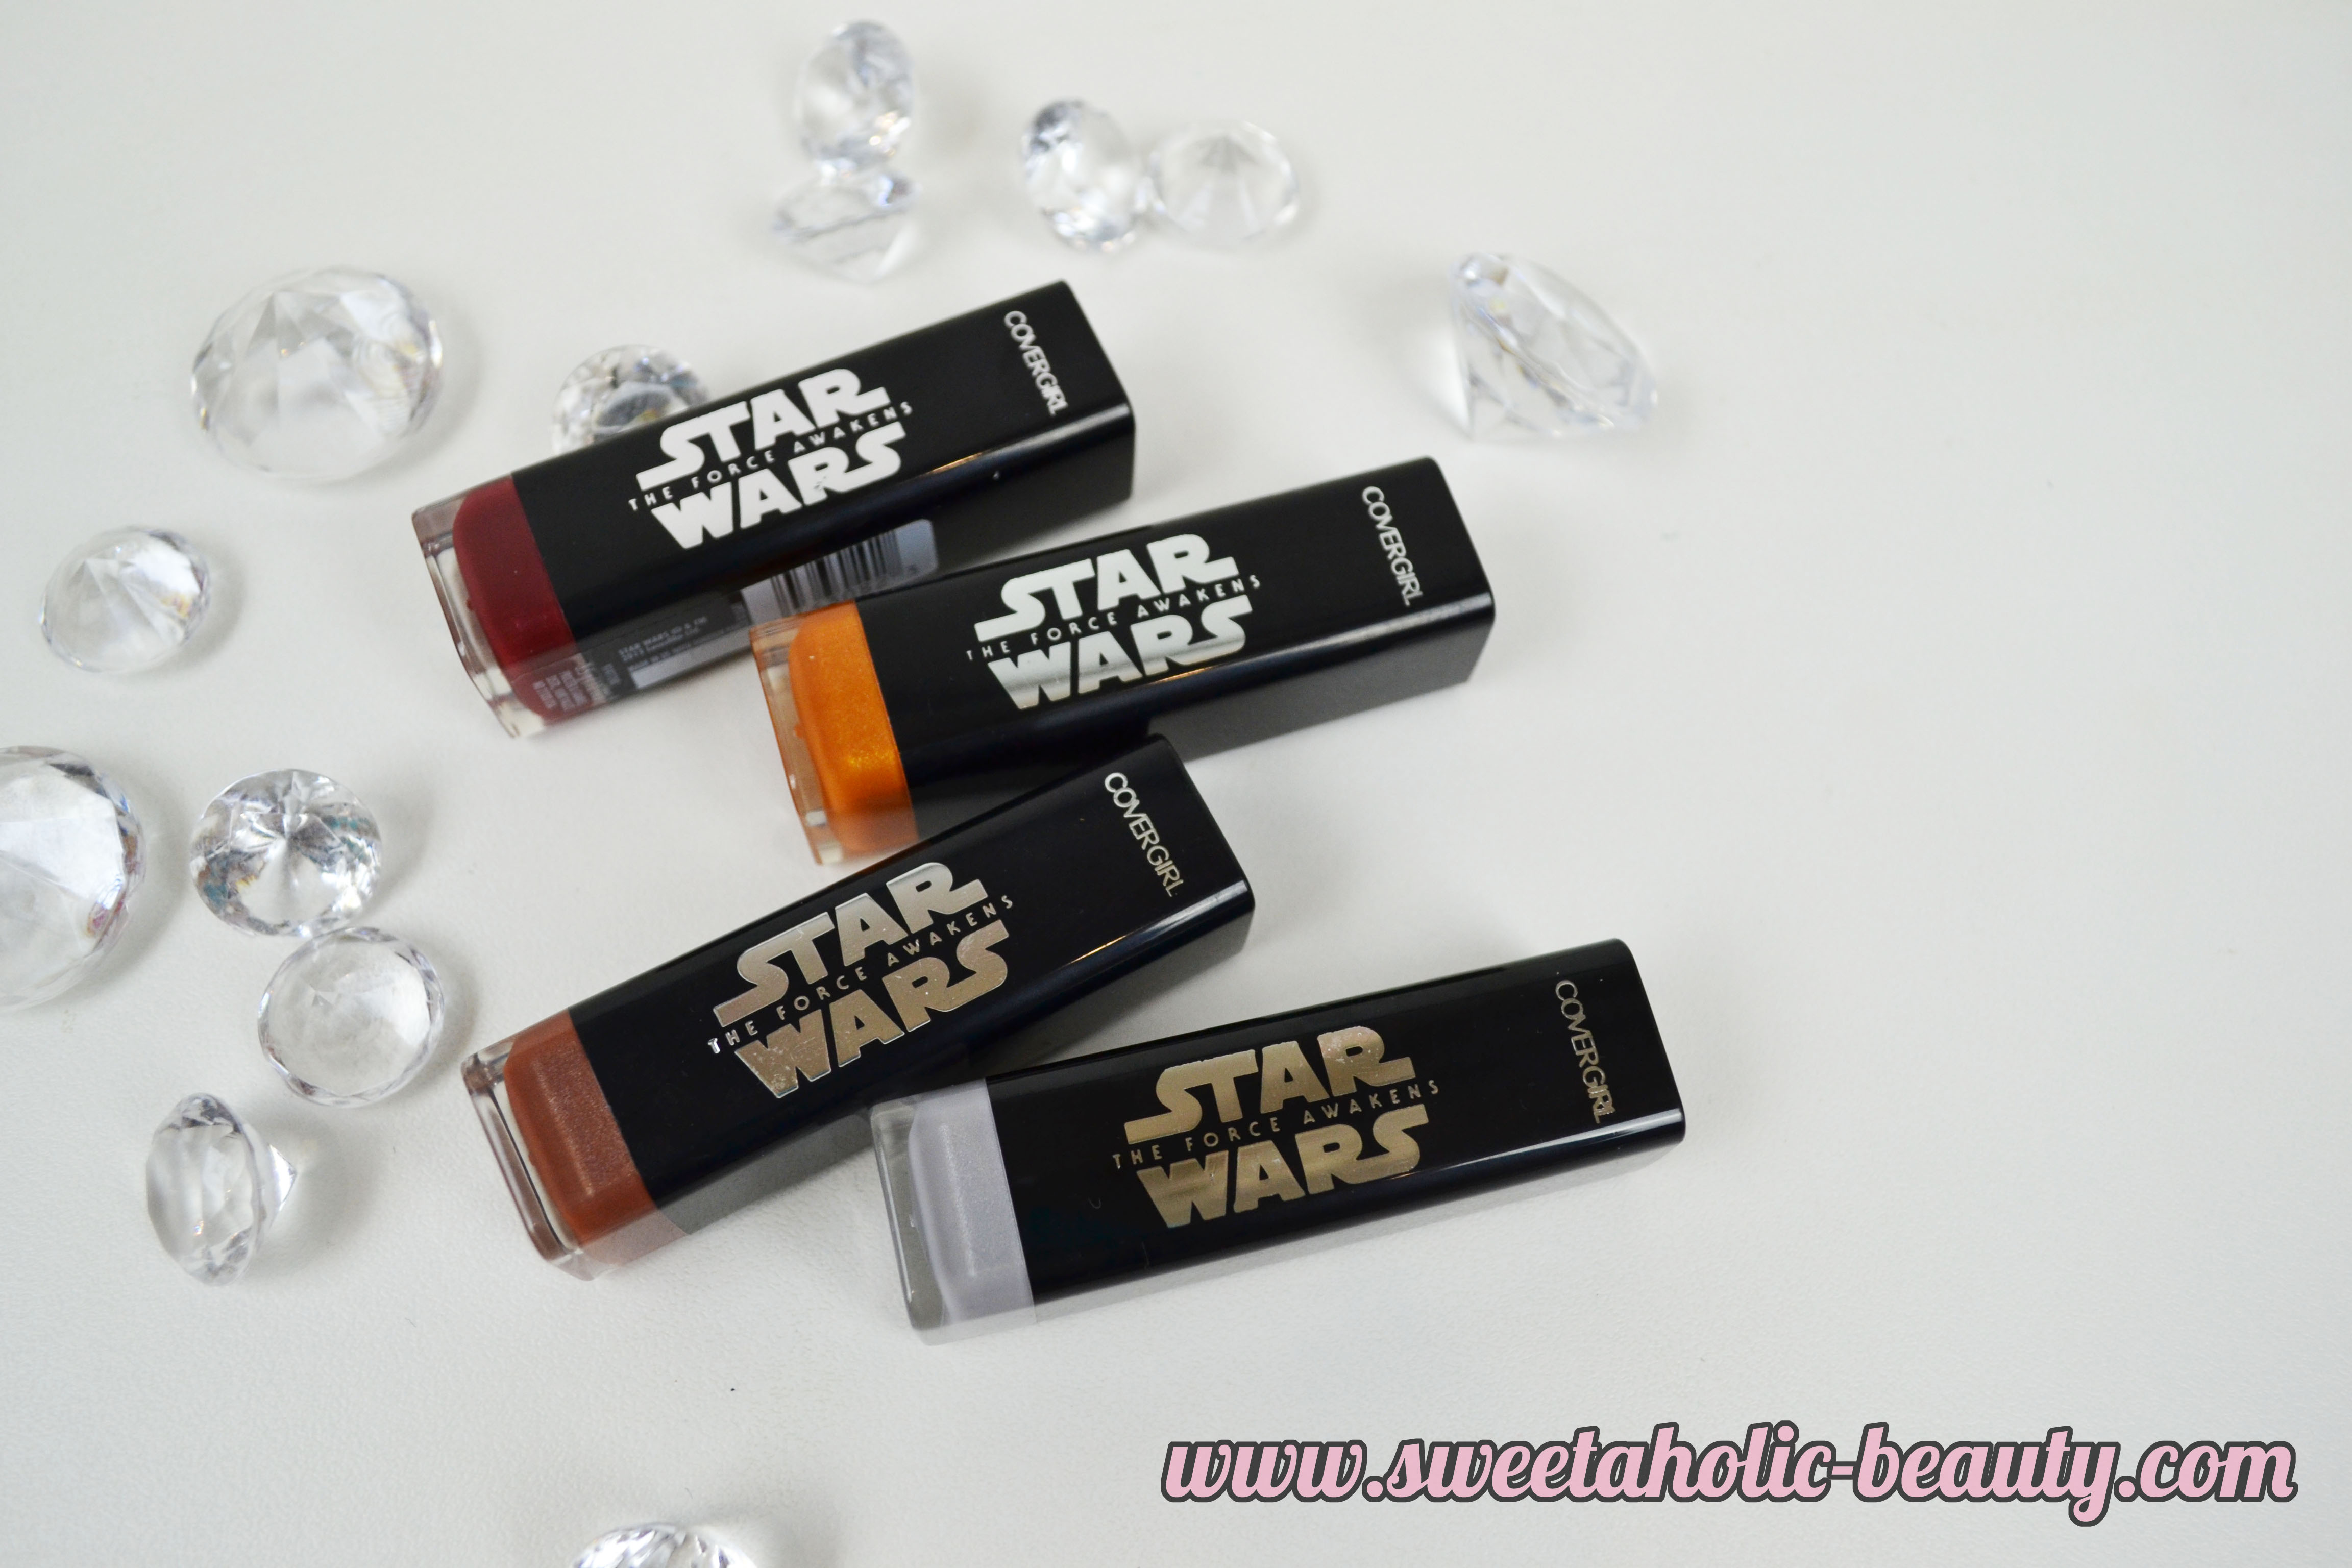 Covergirl Cosmetics Star Wars Colorlicious Lipstick Collection Review & Swatches